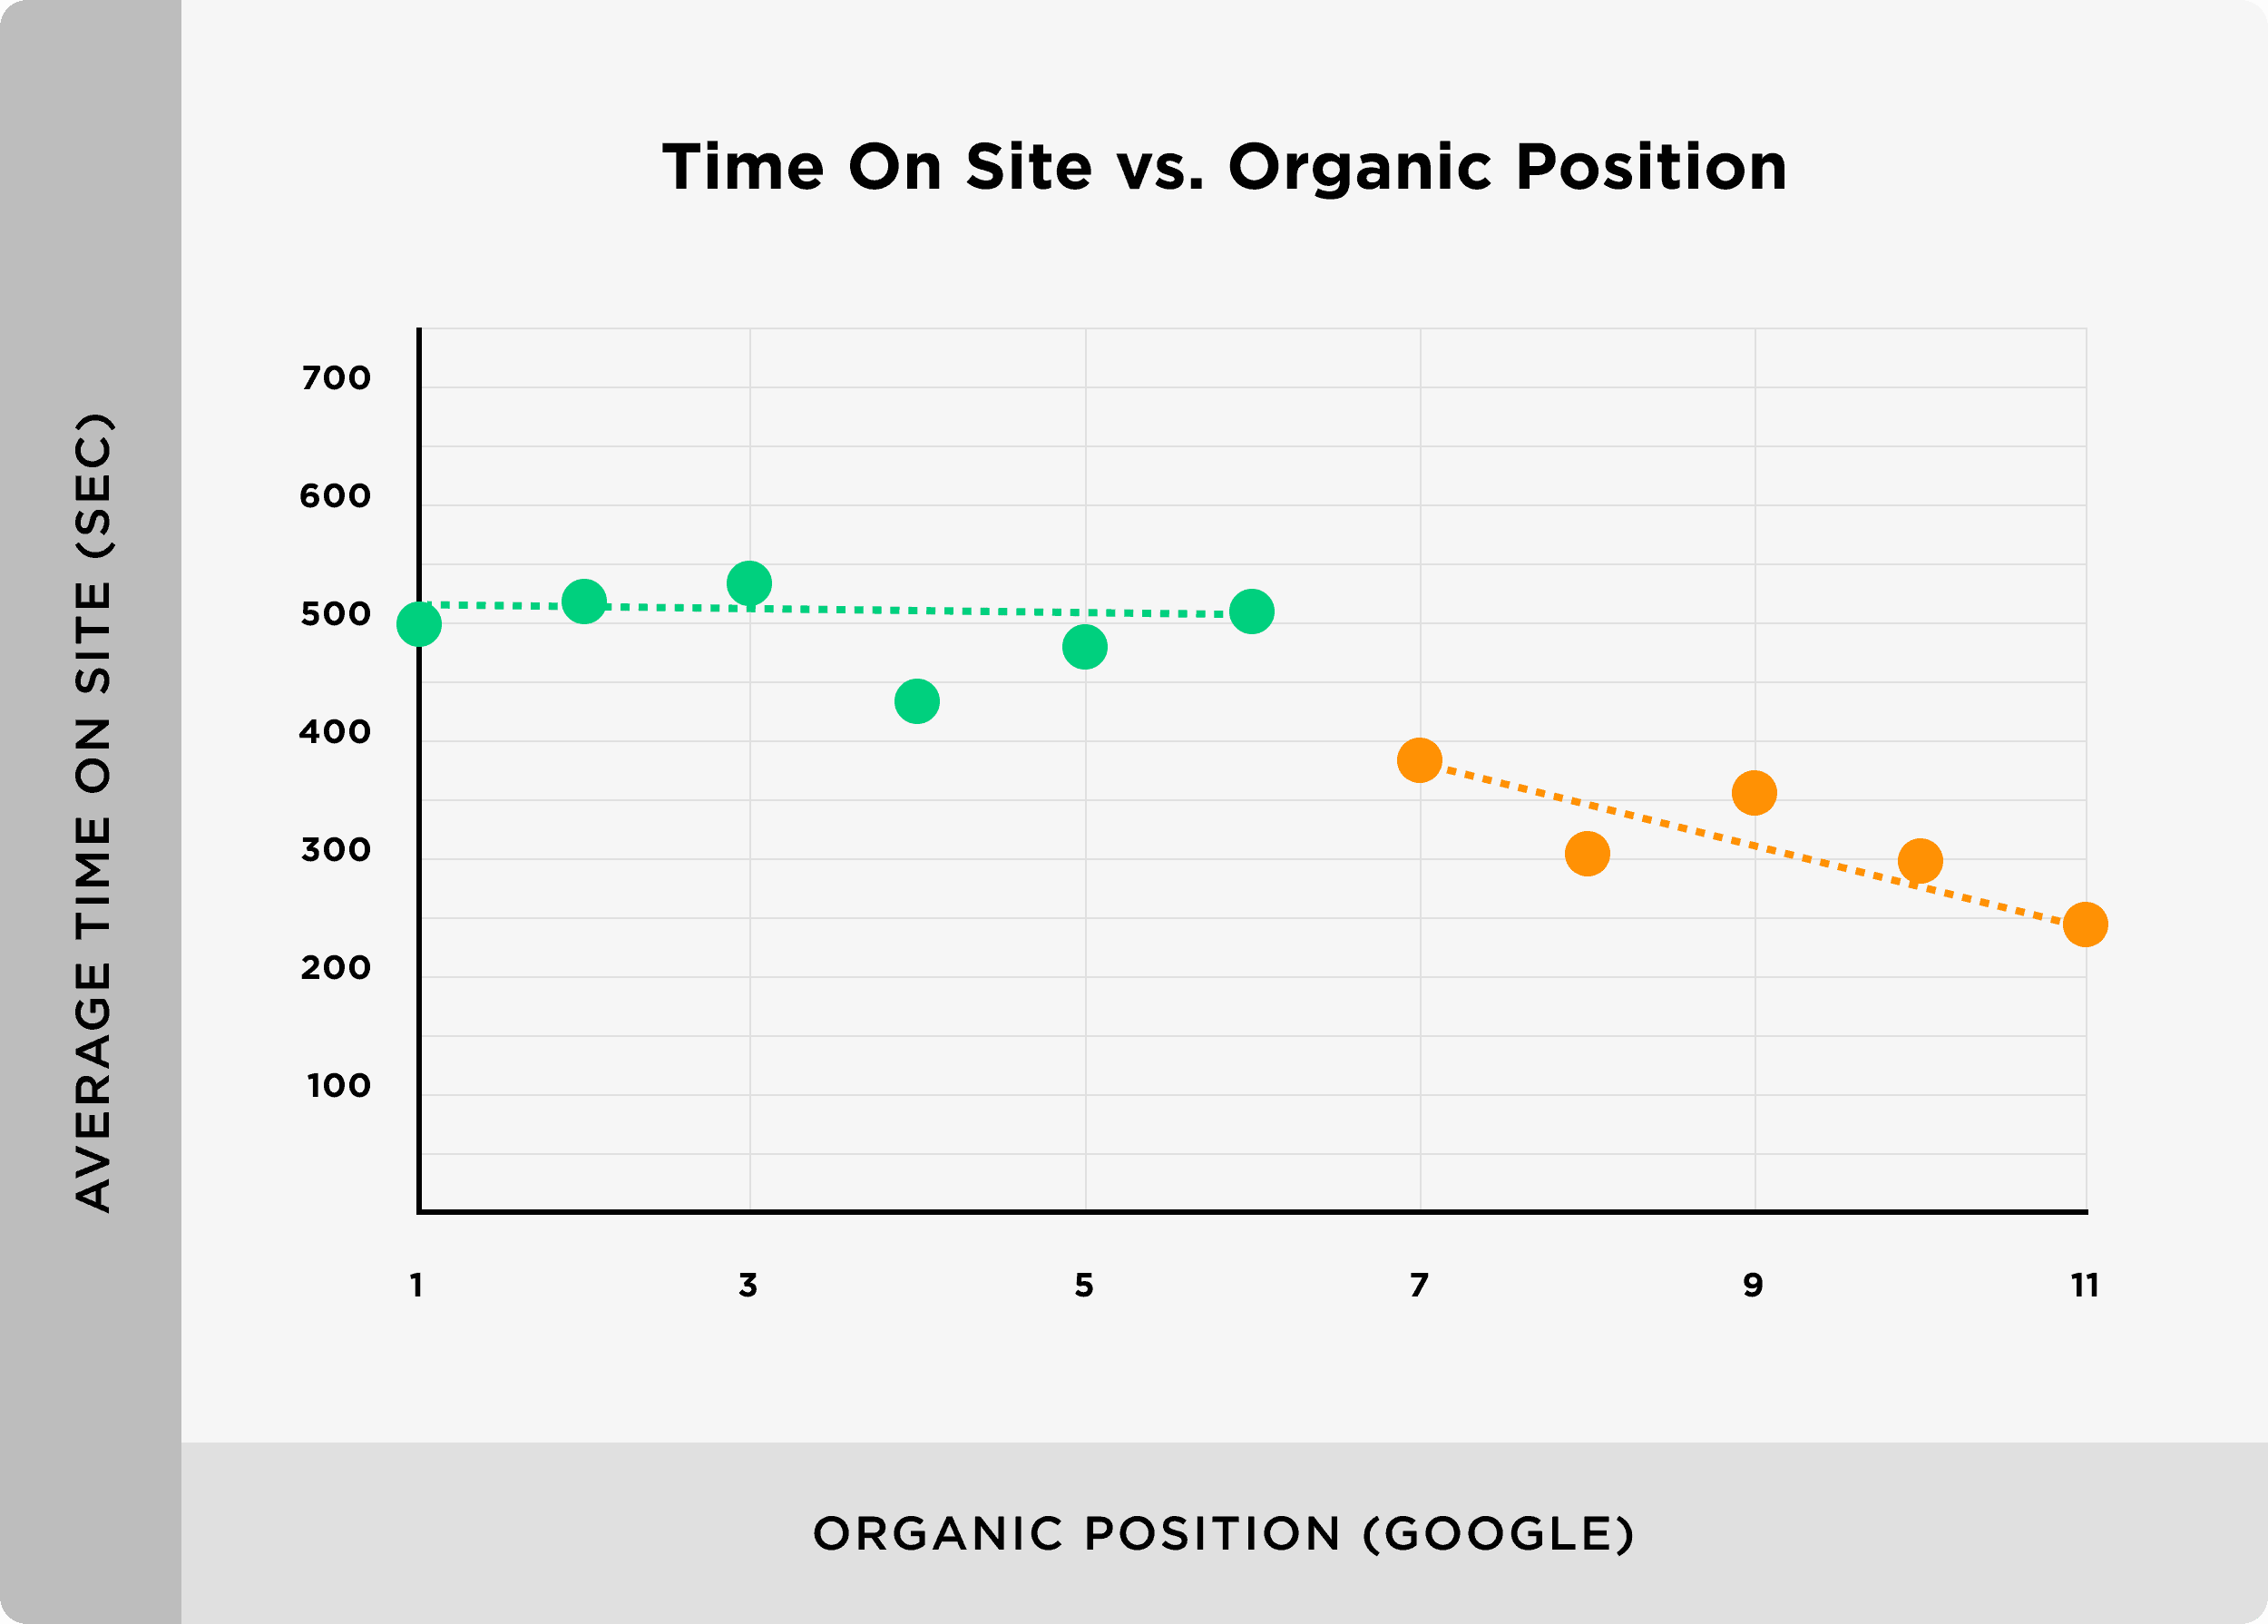 Time on site vs organic position